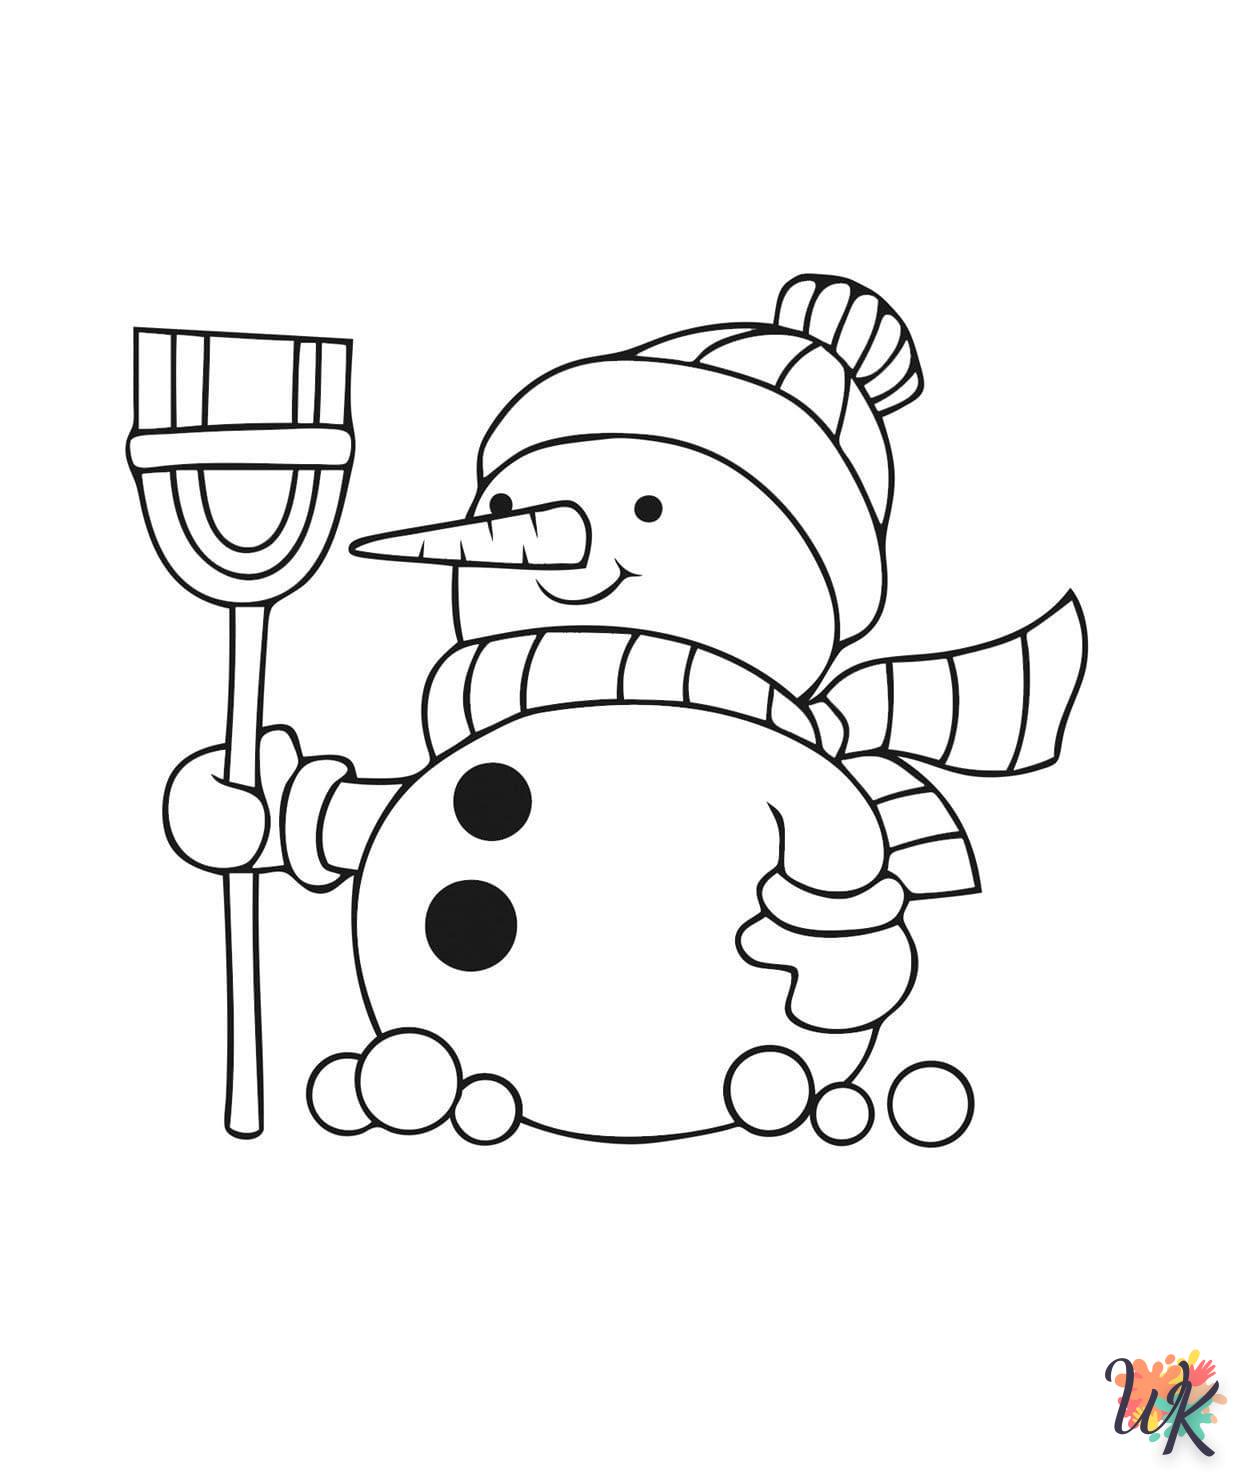 Snowman coloring to color online free